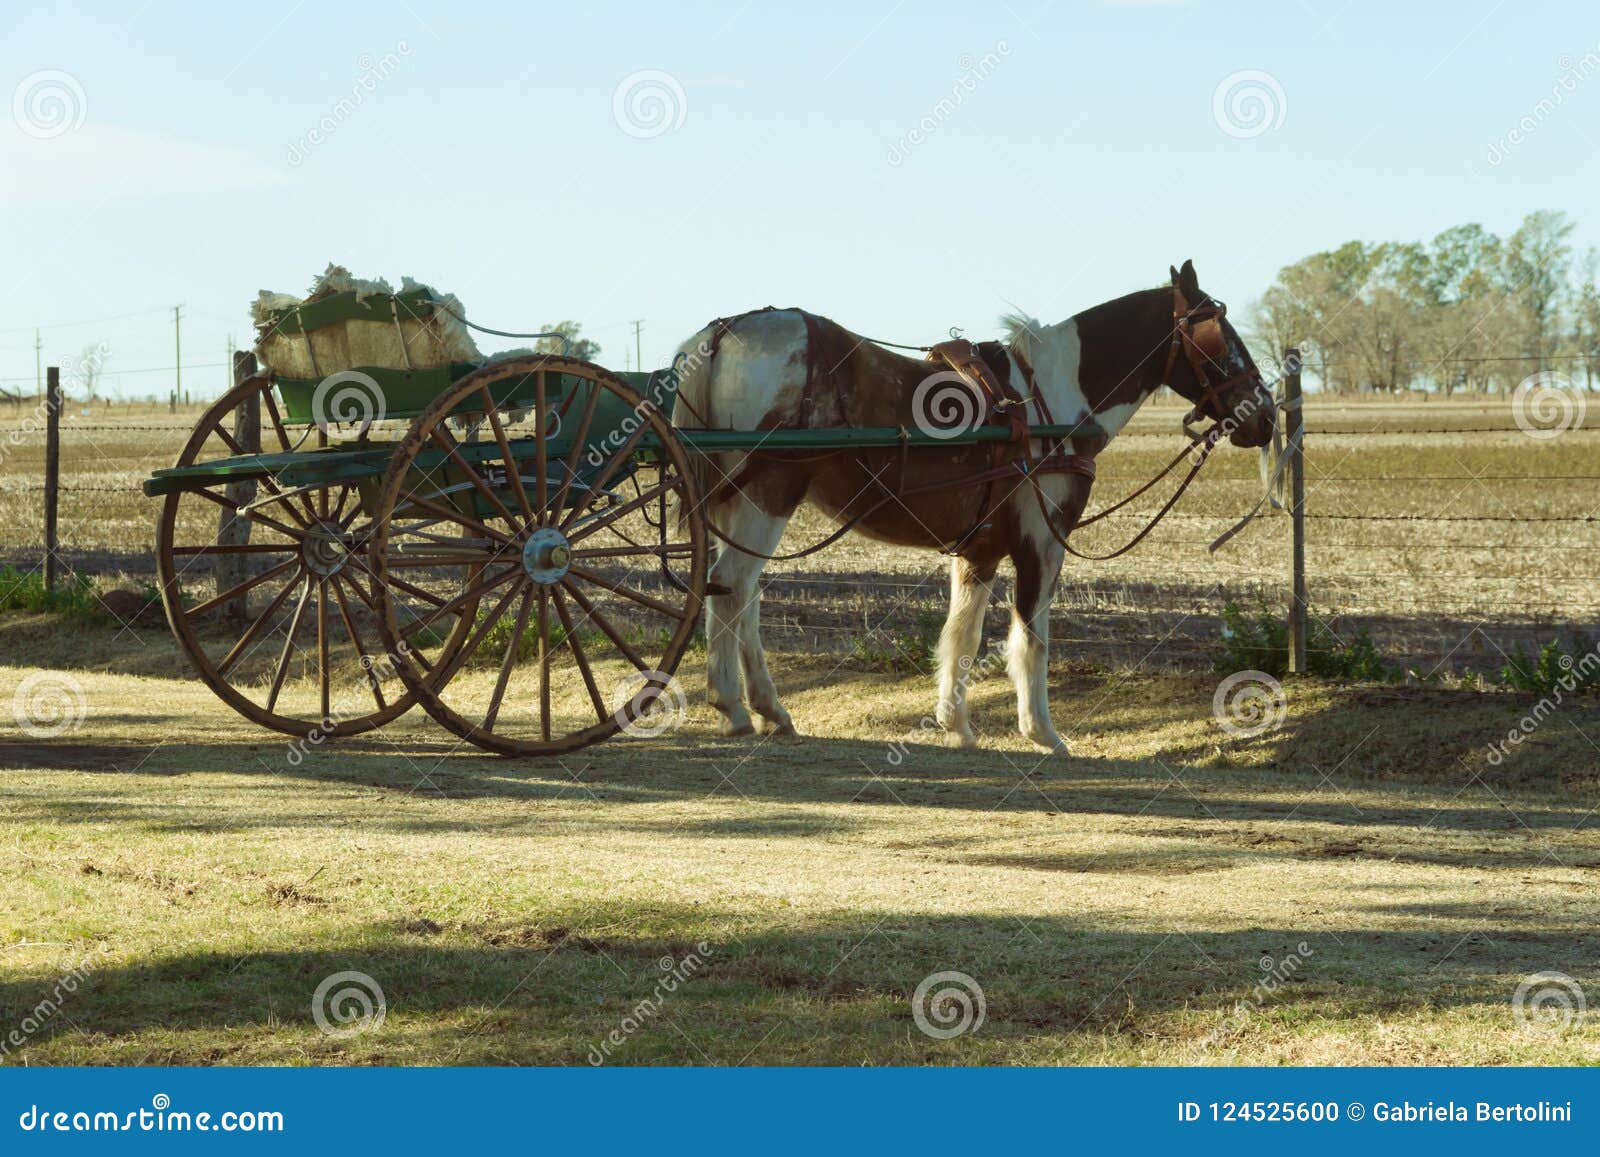 The Traditional Sulky Transport Pulled by Horse Stock Photo - Image of  stallion, saddler: 124525600